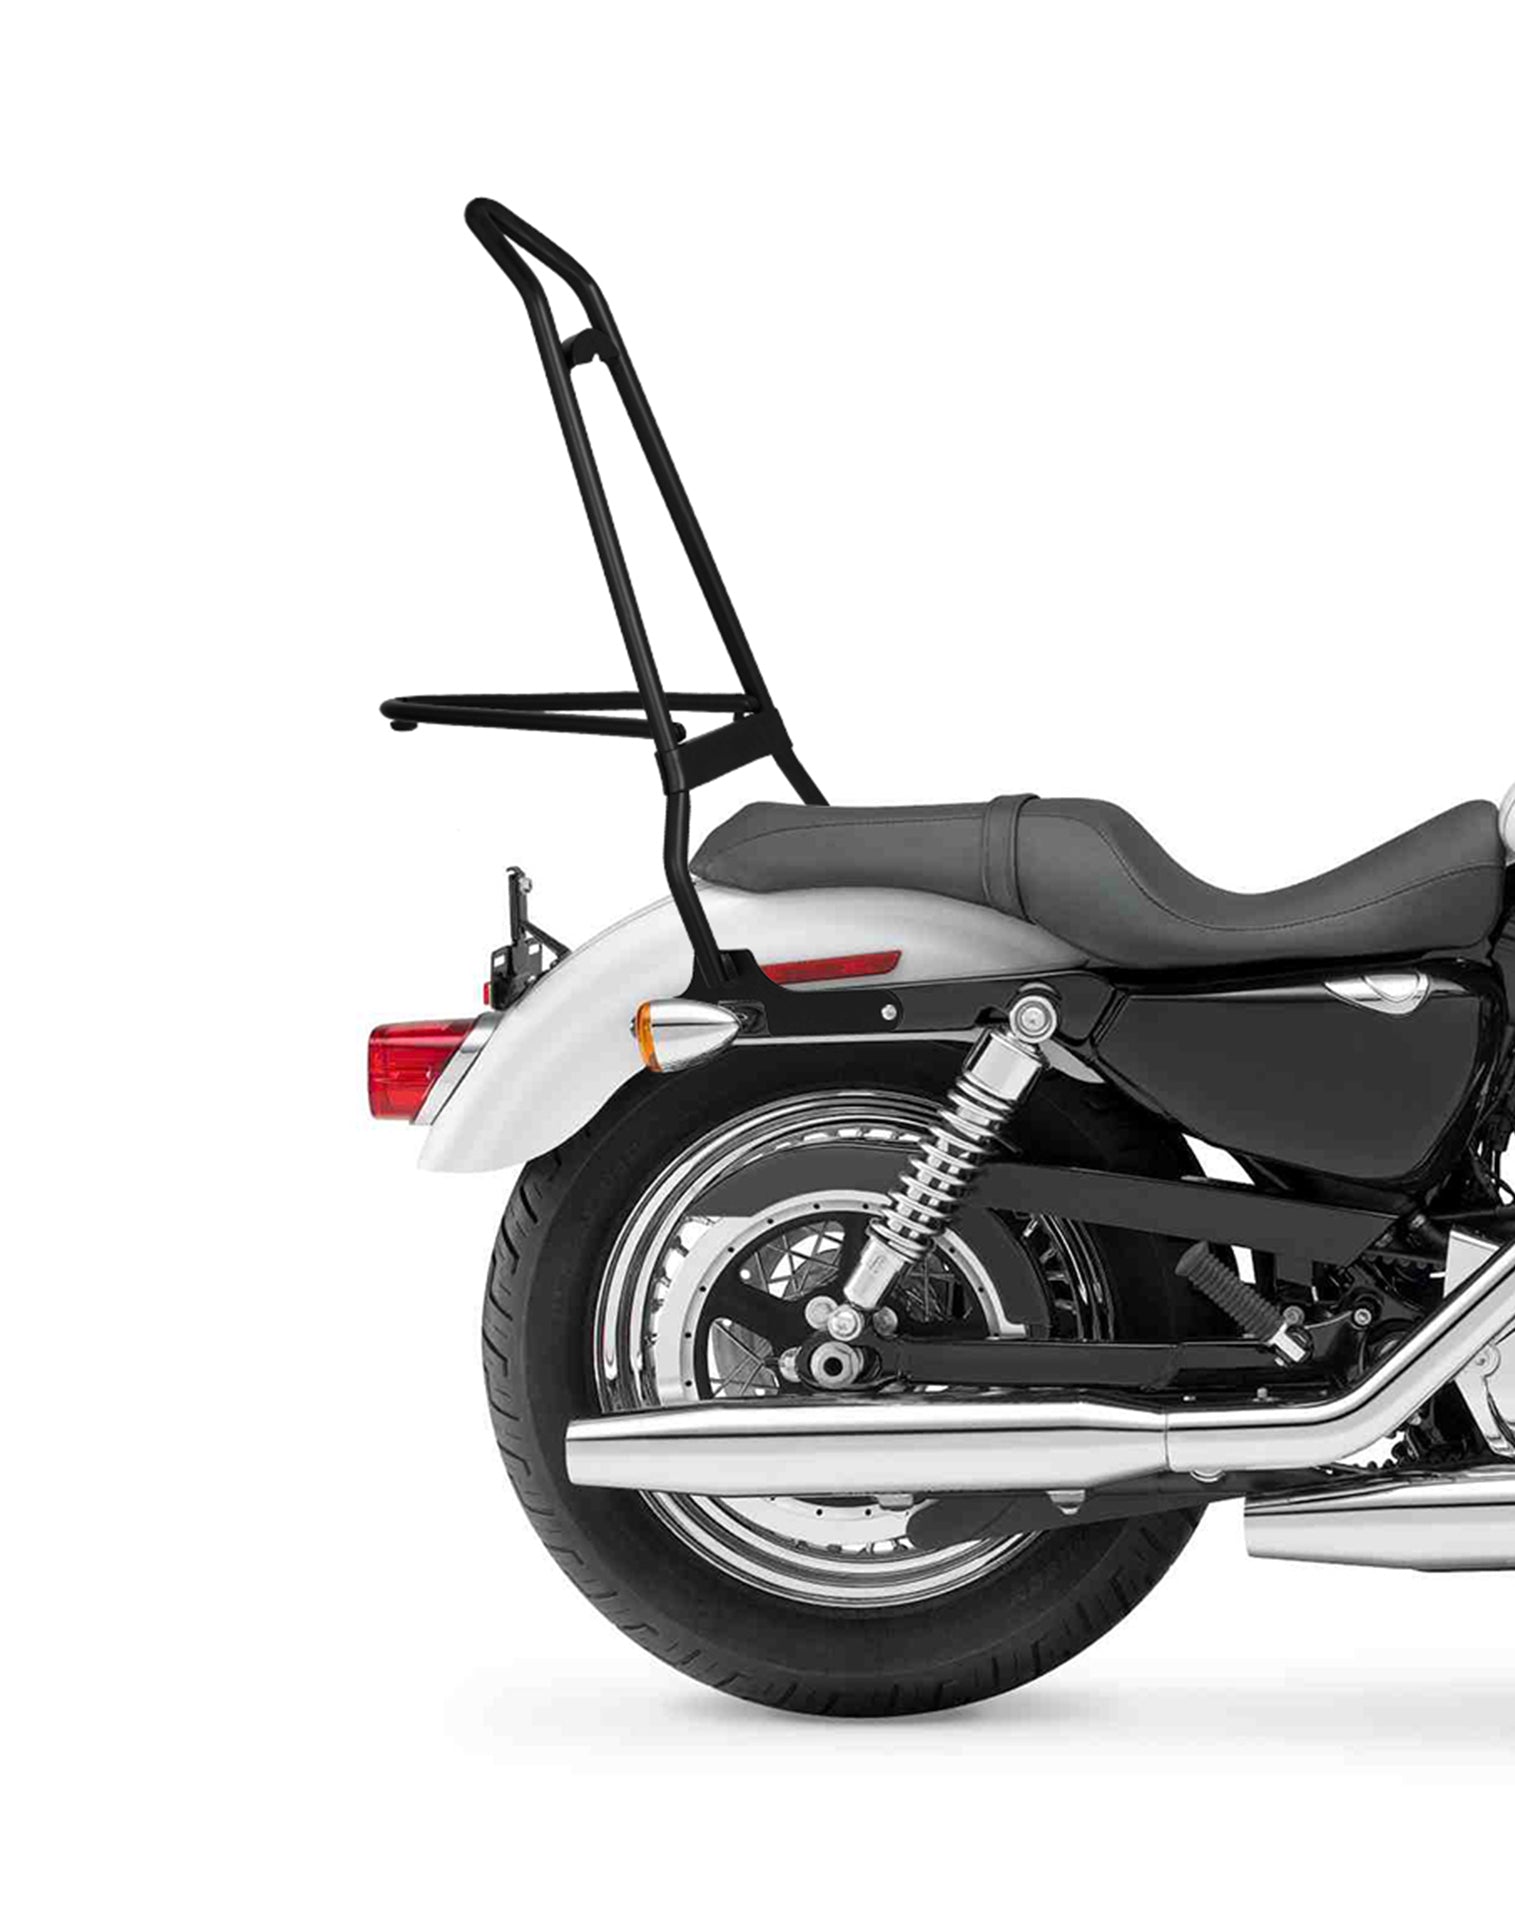 Iron Born Sissy Bar with Foldable Luggage Rack for Harley Sportster 1200 Low XL1200L Matte Black Close Up View